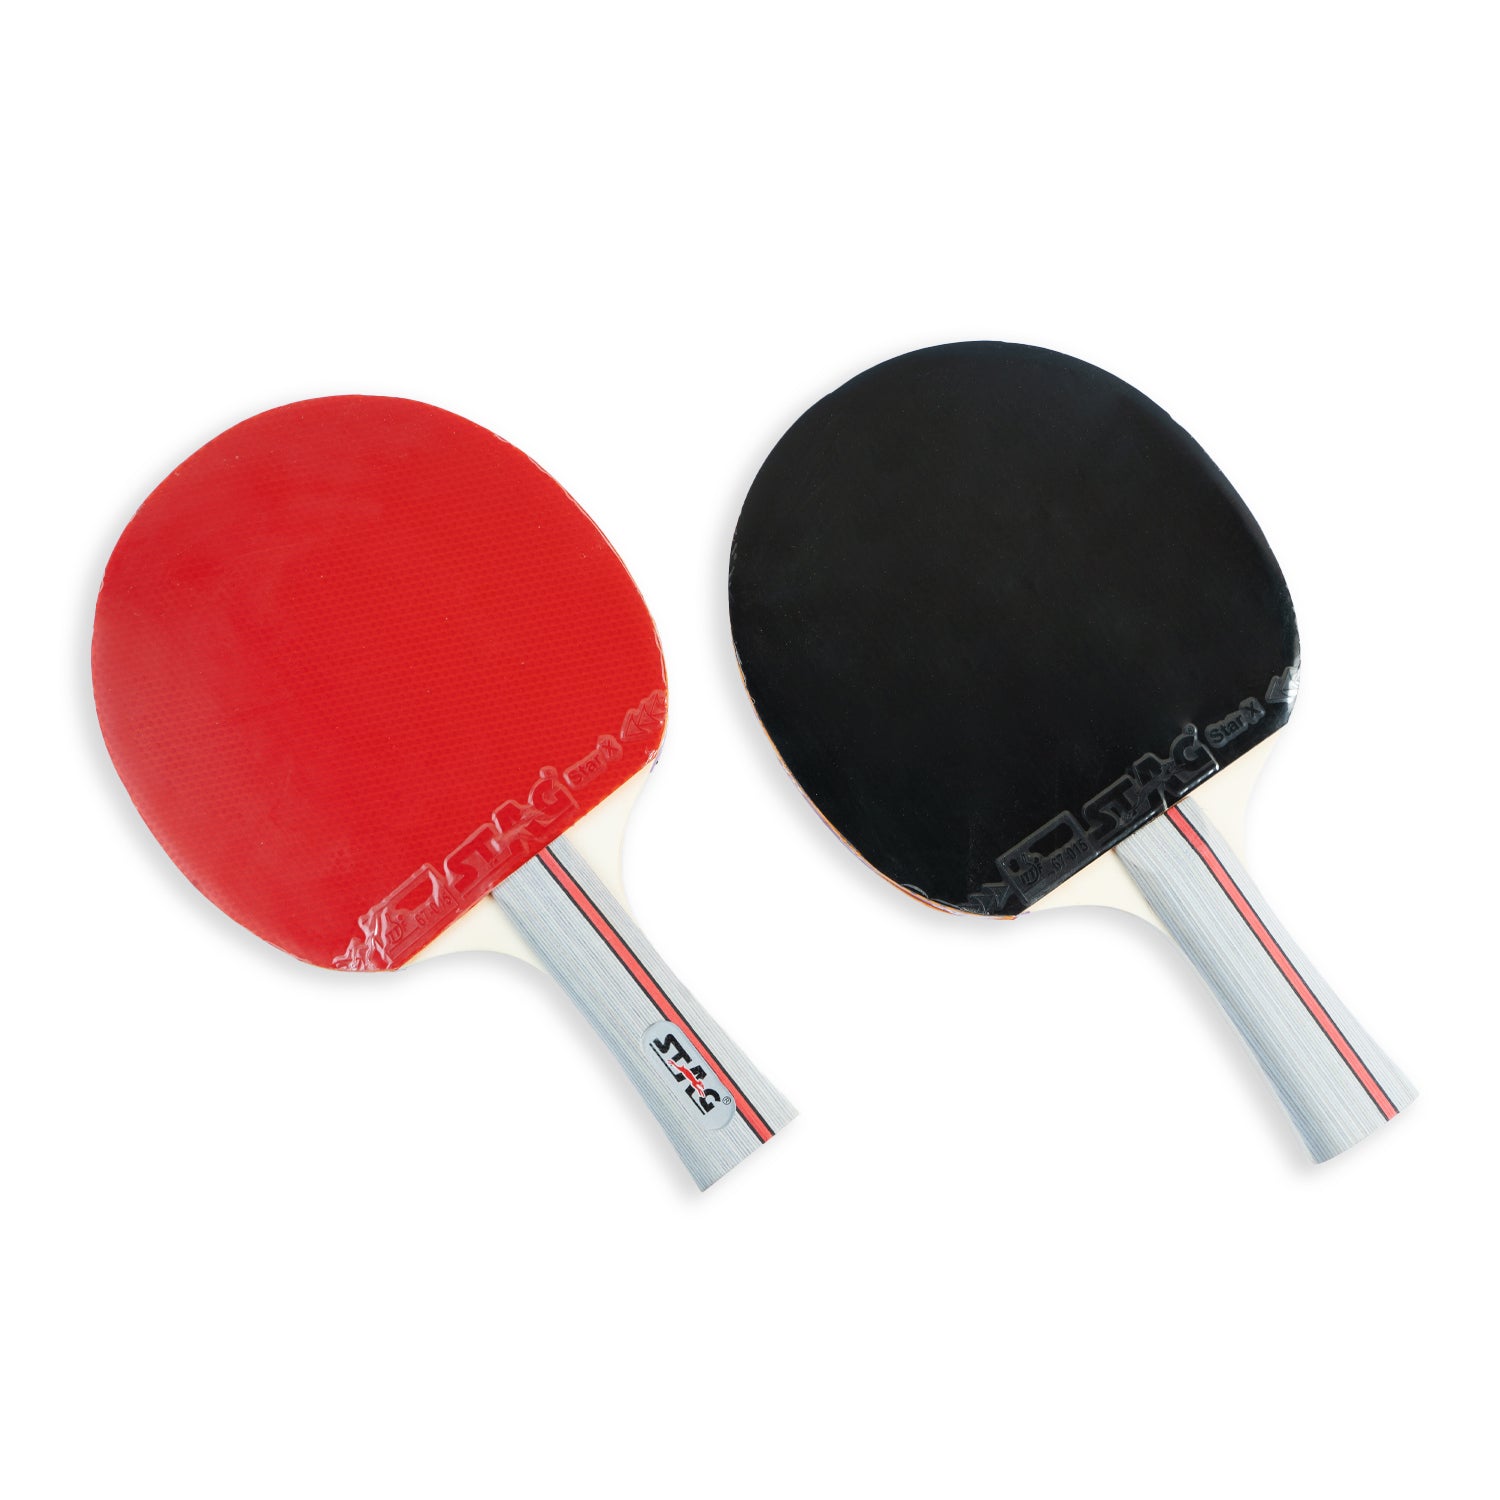 STAG Victor Series Professional Table Tennis (T.T) Set| Premium ITTF Approved Rubber- Table Tennis Rackets and T.T Balls Included| All-in-One Ping Pong Paddle Playset - Table Game Accessories.